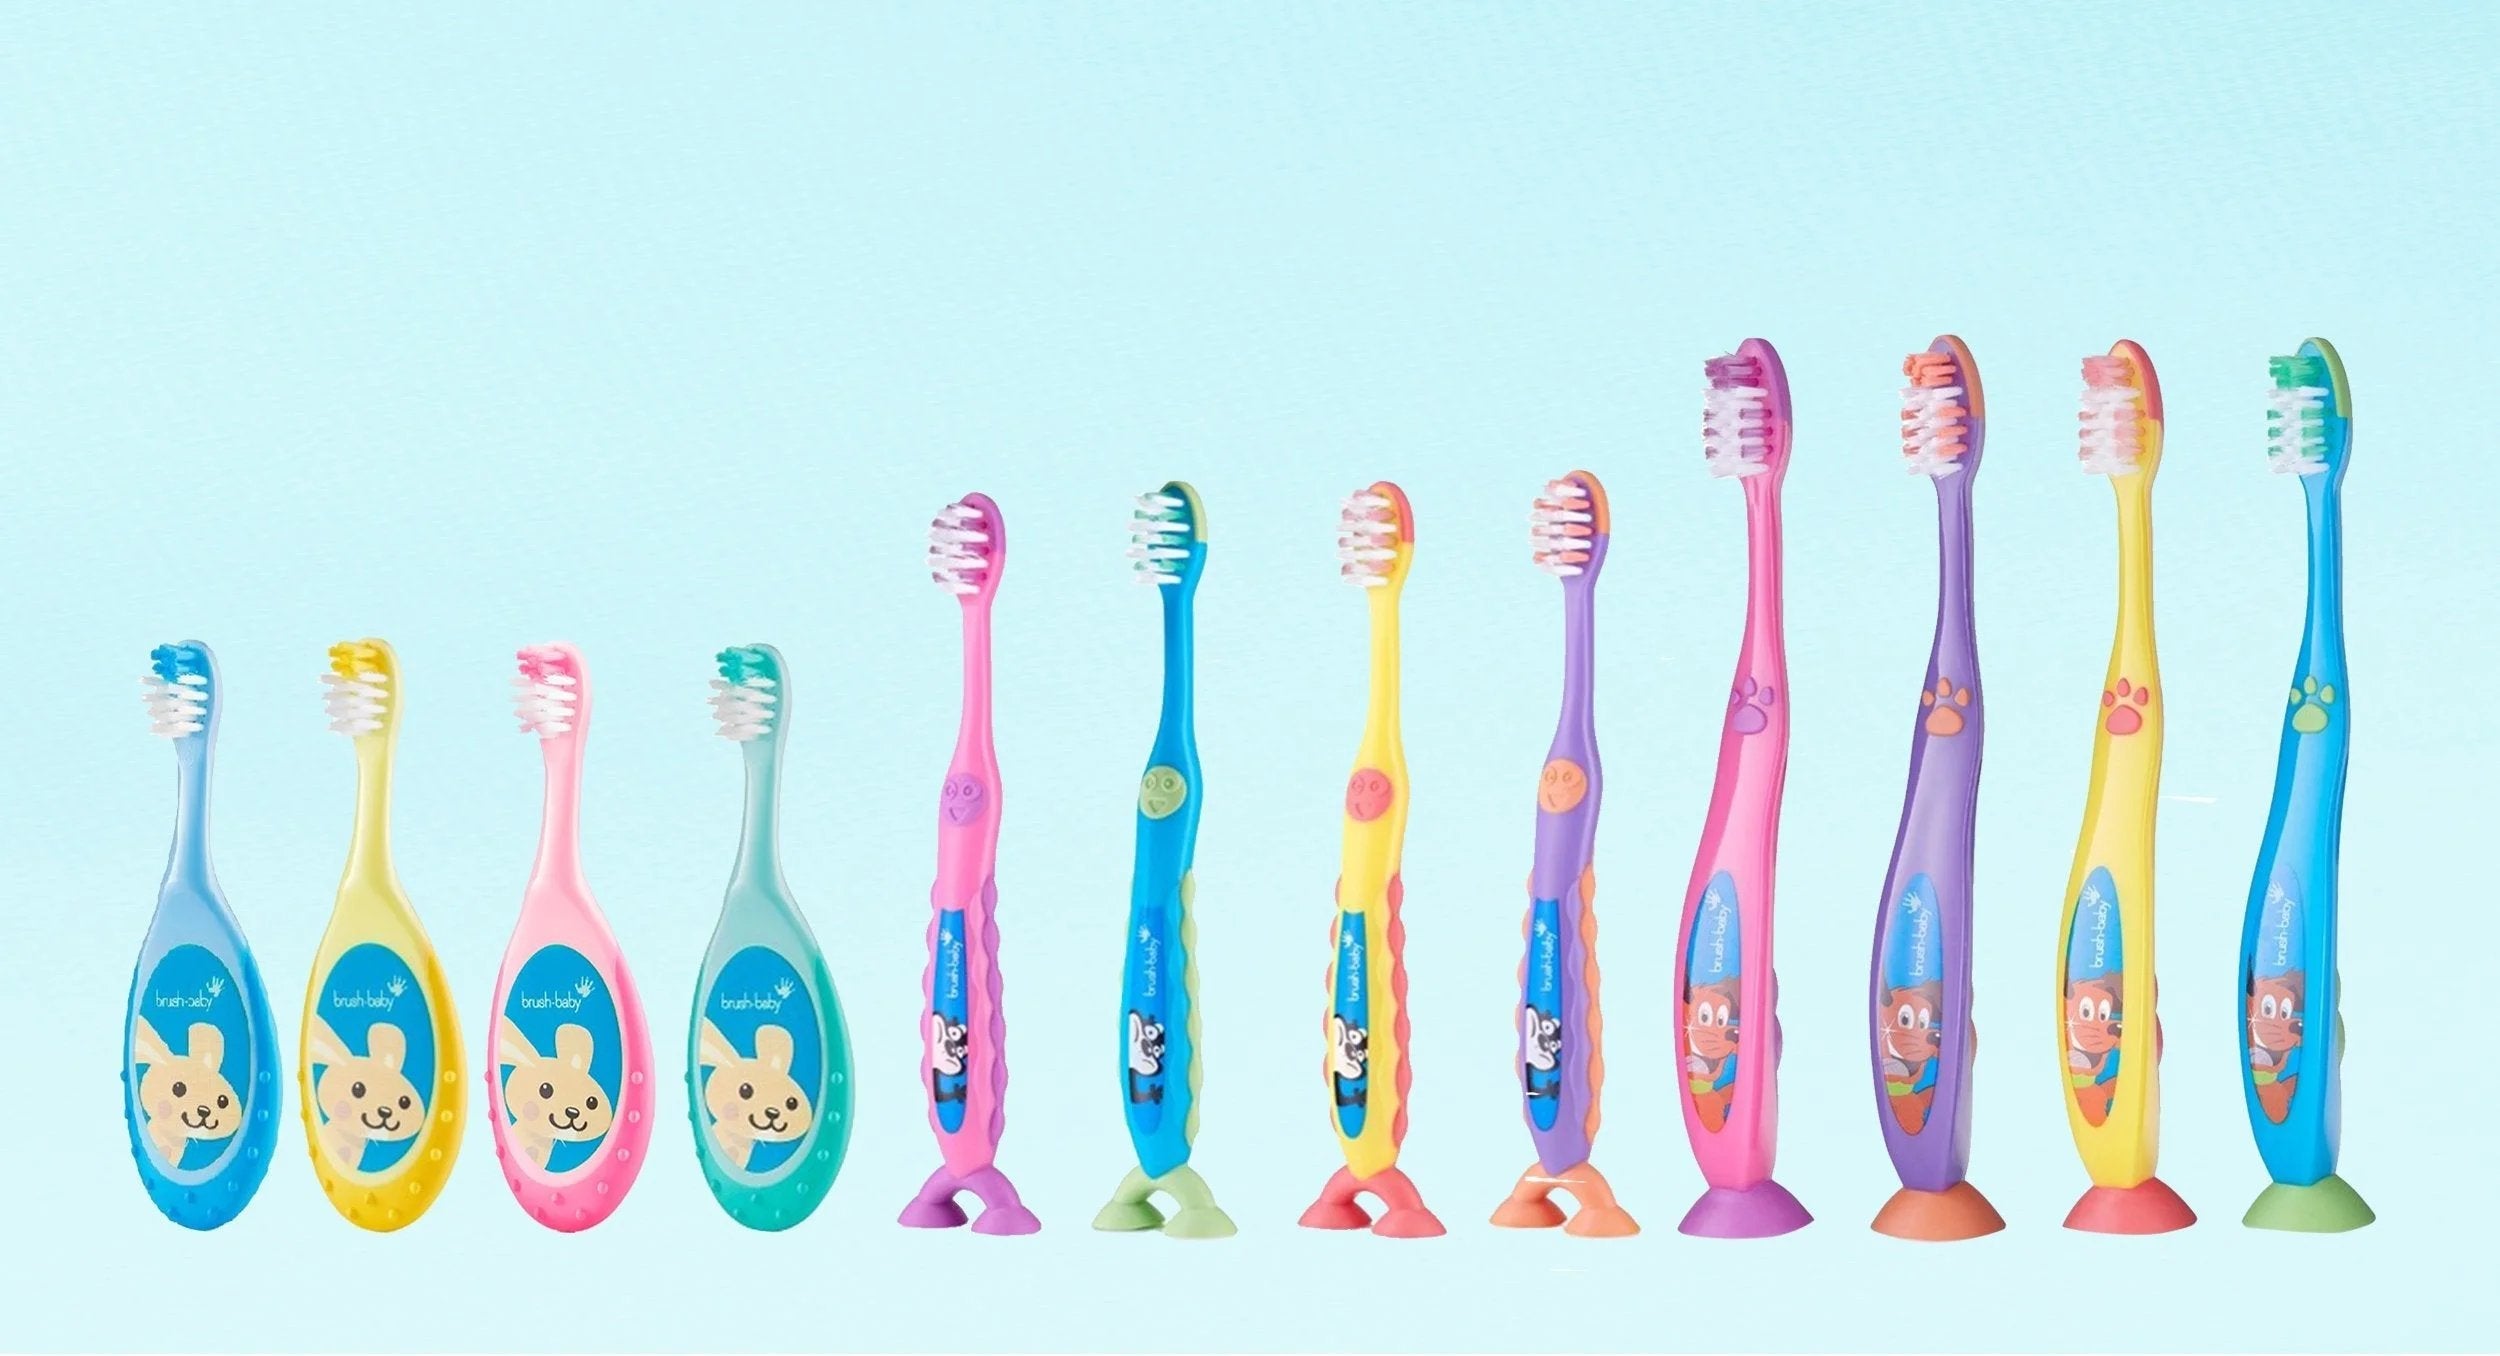 Childrens toothbrushes - manual baby toothbrush